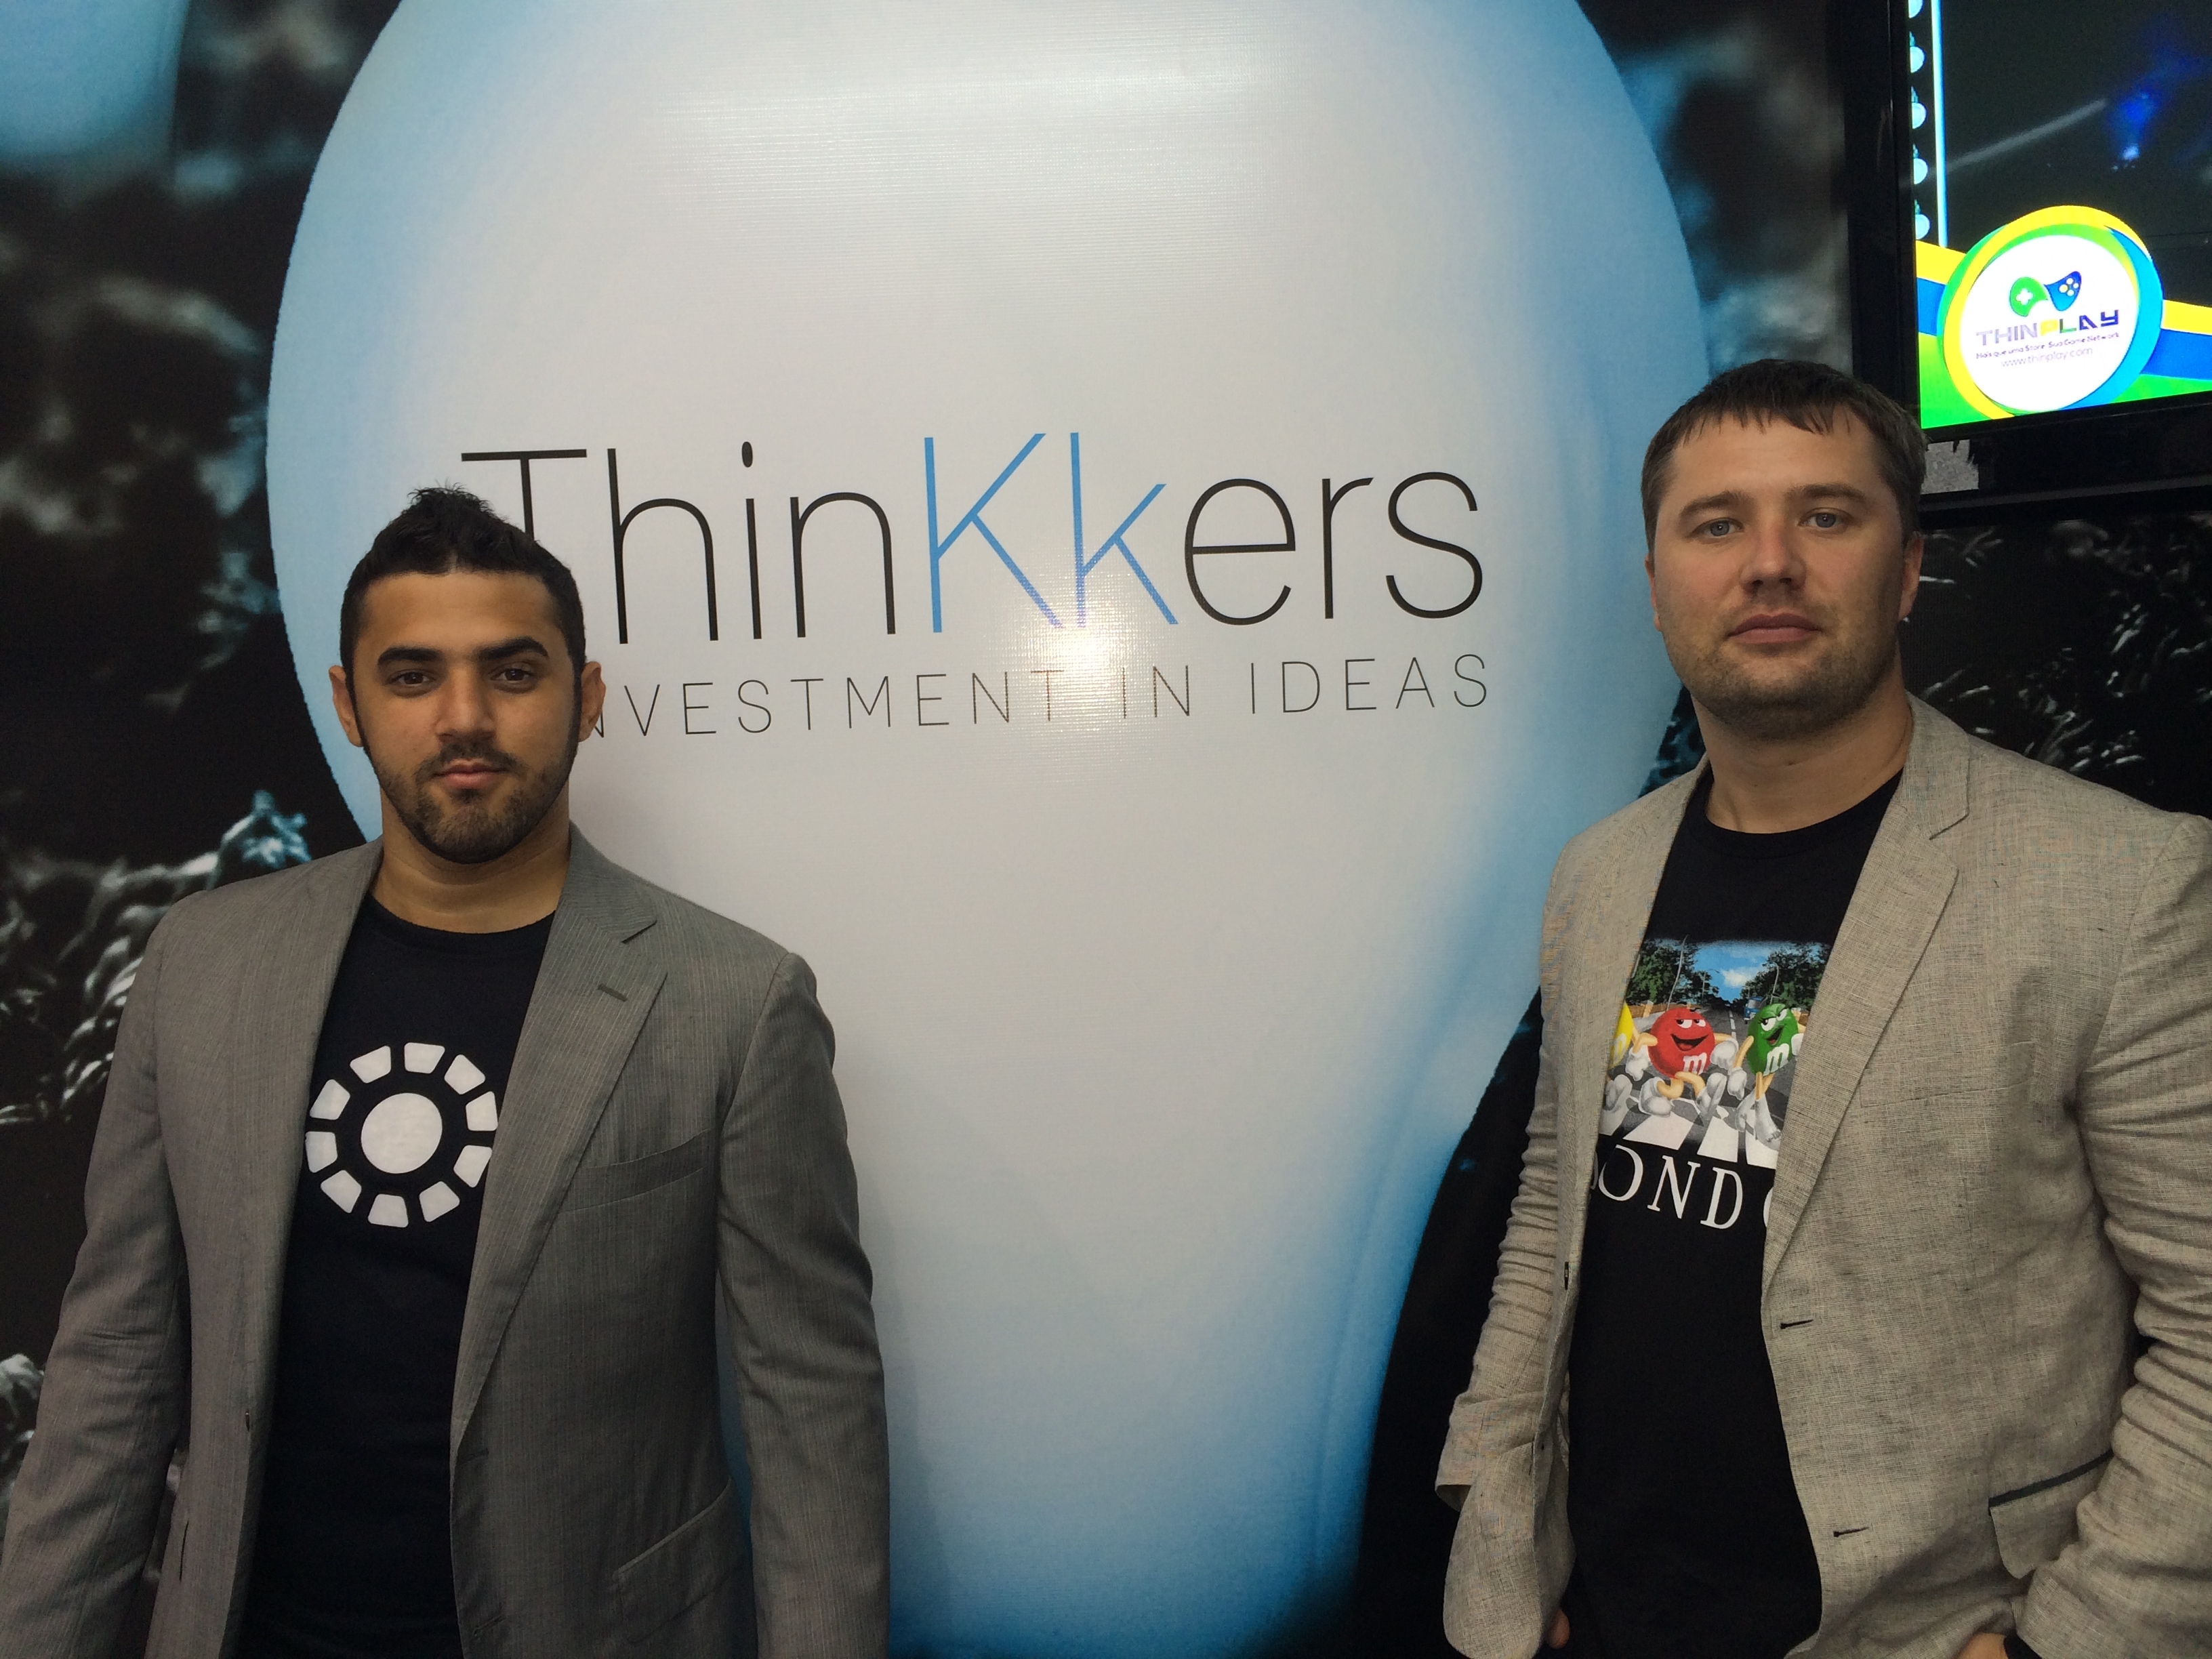 Thinkkers